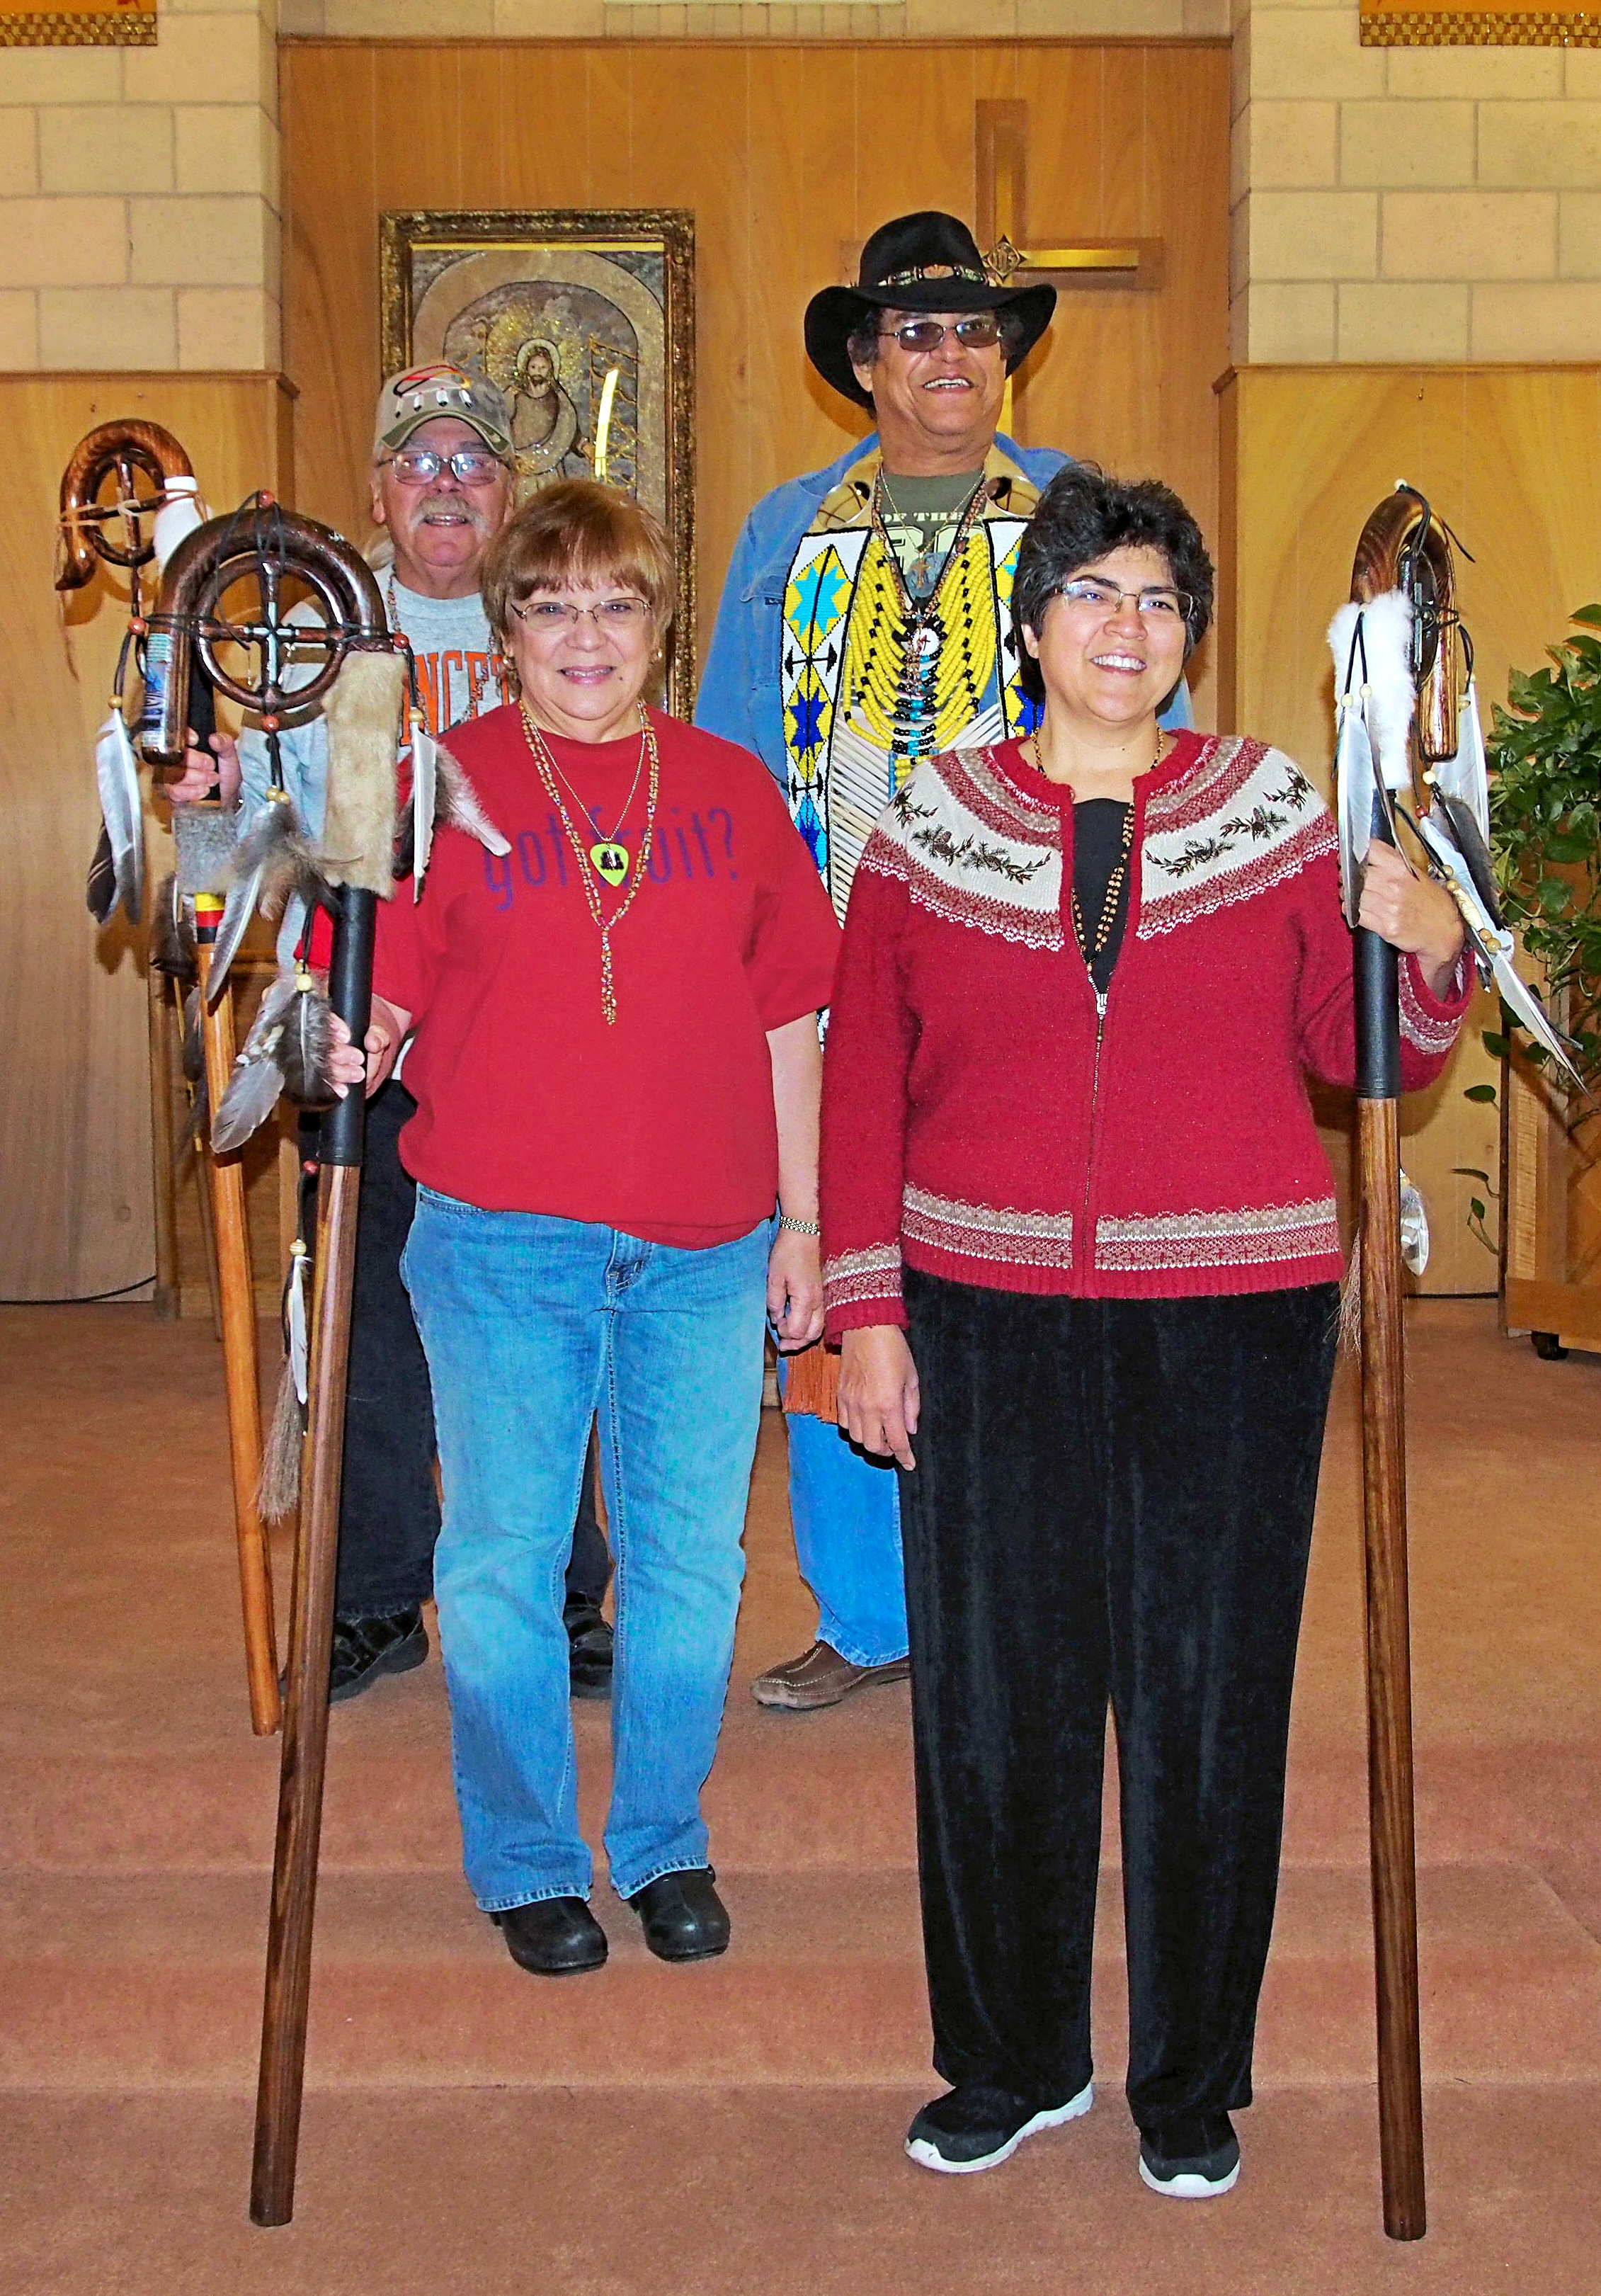 Students of the Native American Course of Study meet twice a year in different regions of the U.S.  In addition to the classroom work, they visit historic sites in the area and meet with Native communities. Photo courtesy of Fred Shaw.